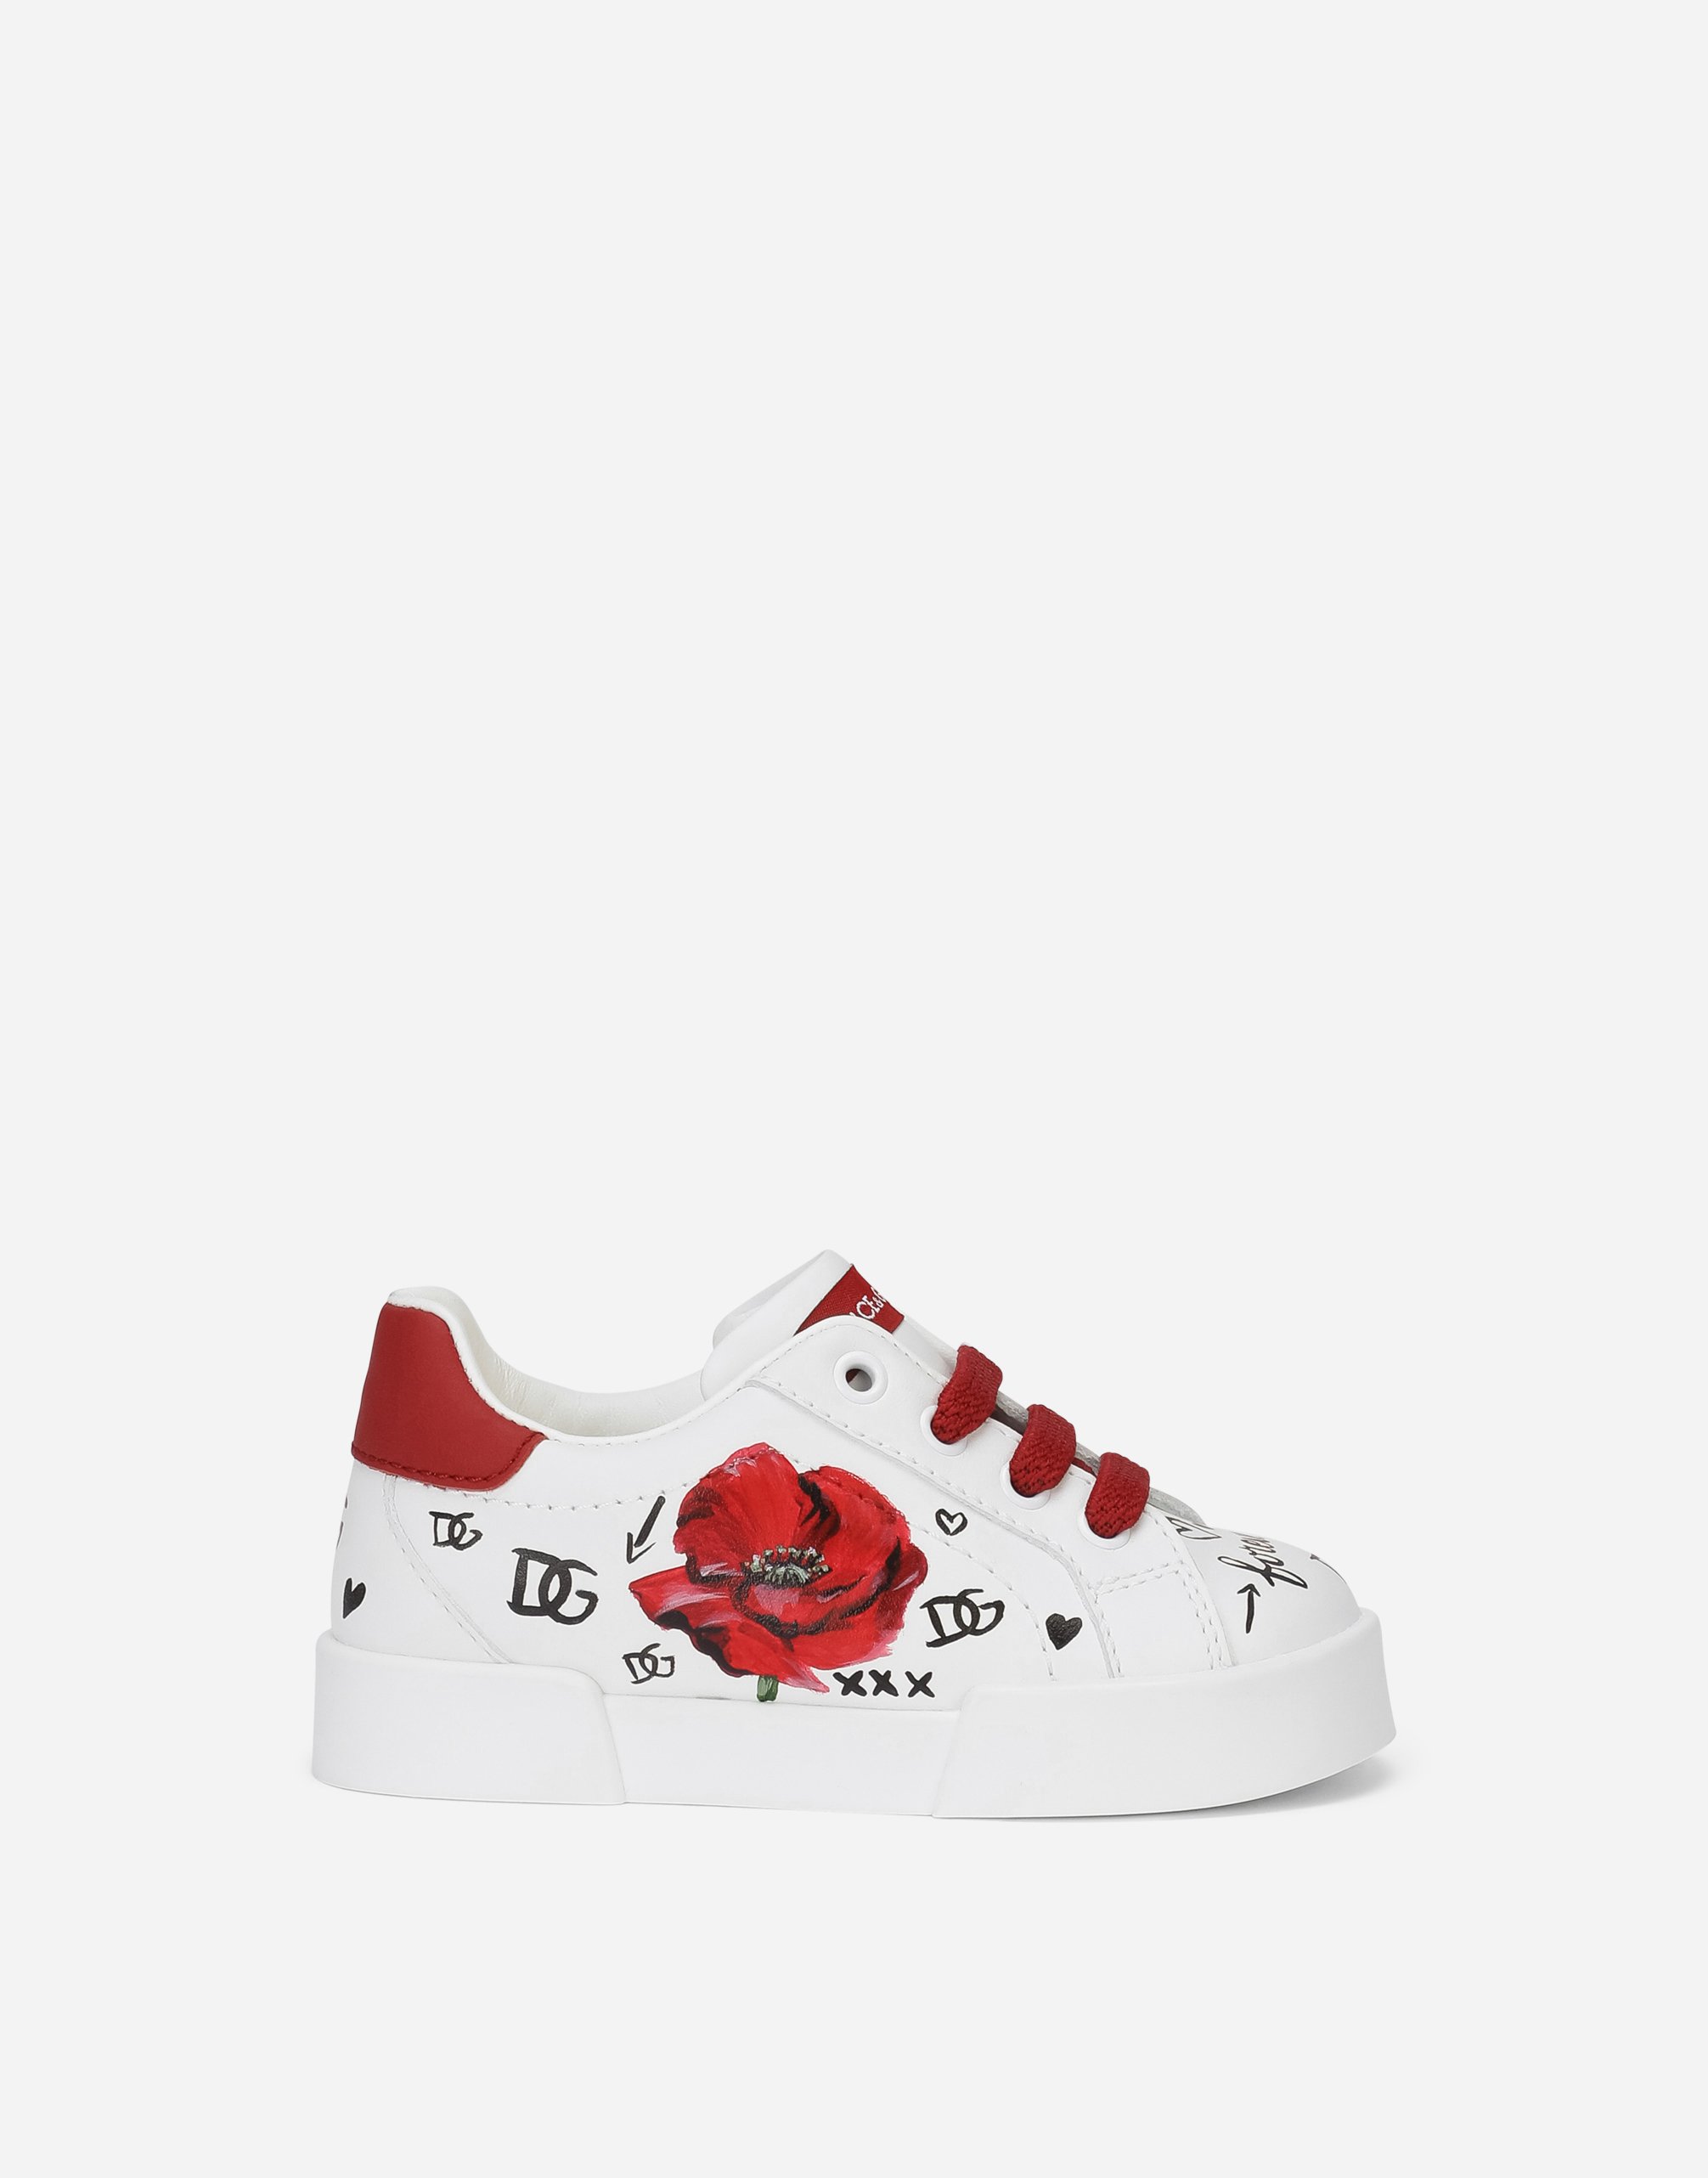 Dolce & Gabbana Babies' First Steps Portofino Light Sneakers With Poppy Print In Multicolor